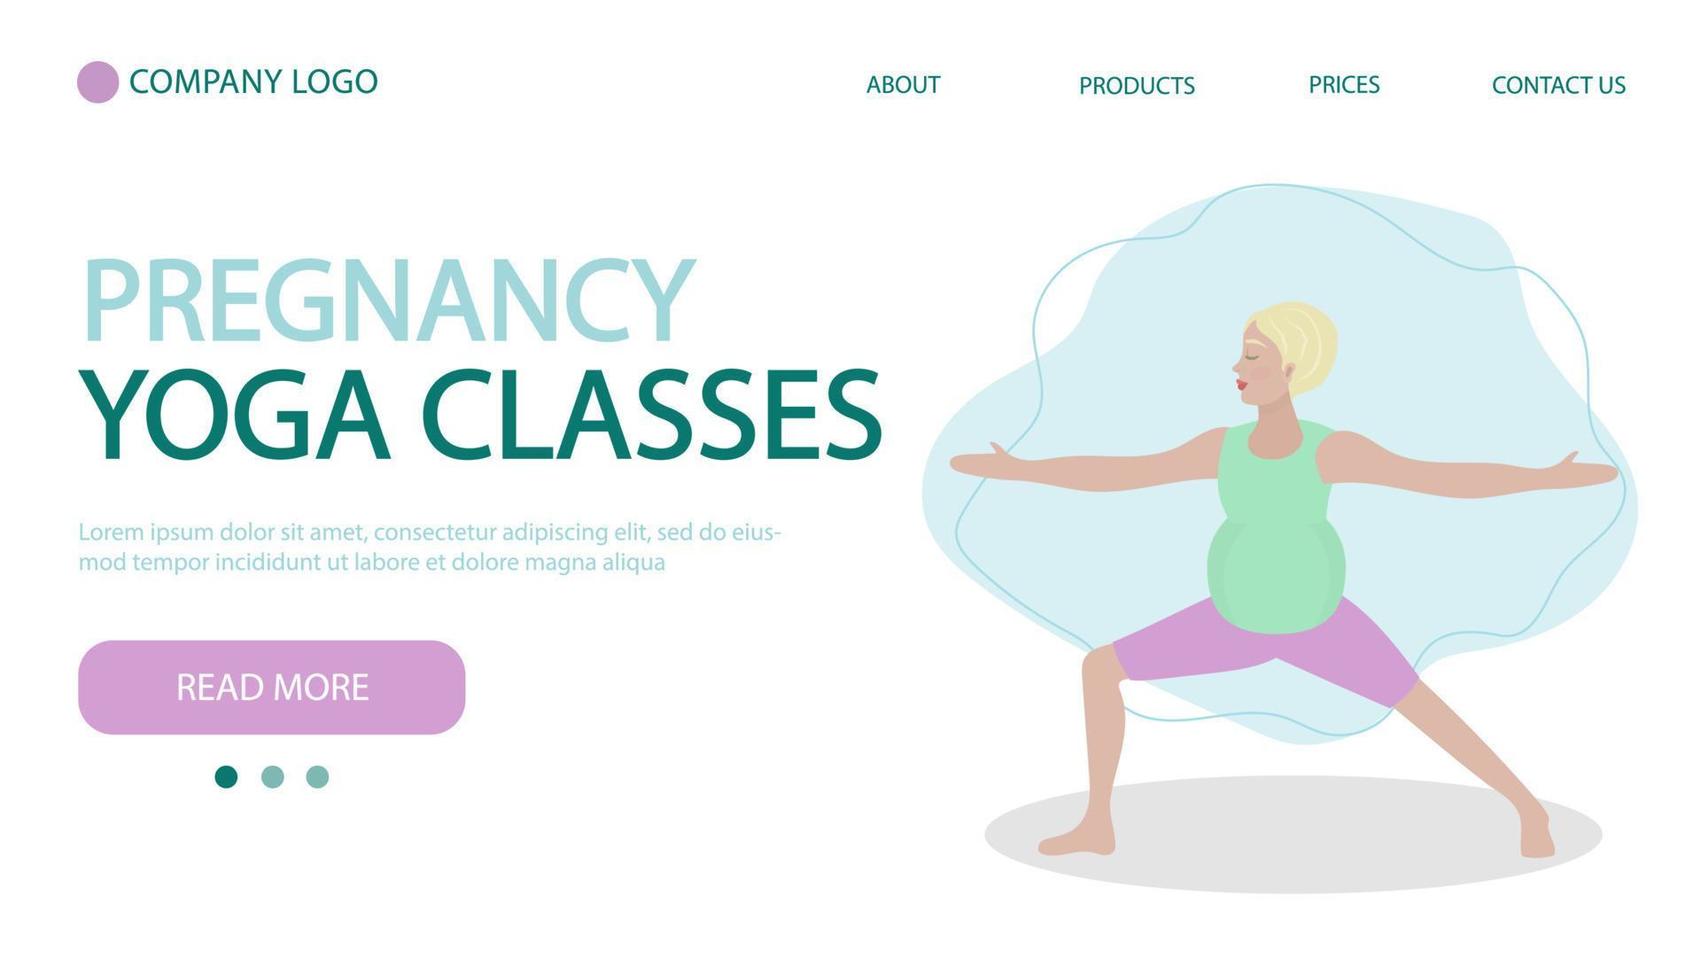 Pregnant woman exercising yoga. Concept illustration for healthy lifestyle, sport, exercising. Home page banner vector